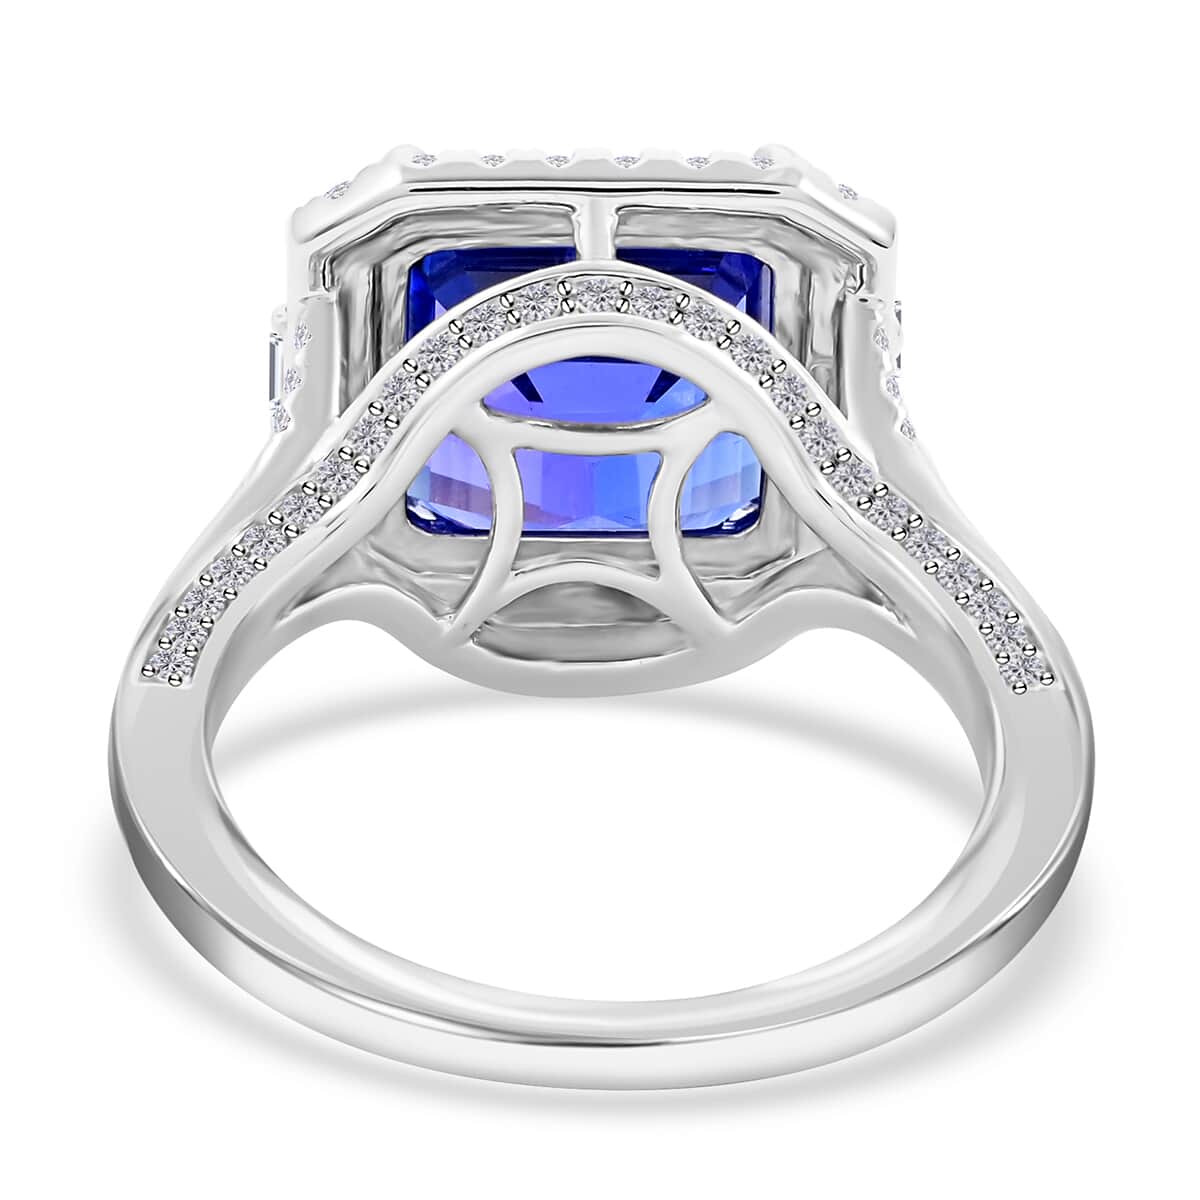 Certified Rhapsody 950 Platinum AAAA Asscher Cut Tanzanite and E-F VS Diamond Ring 8.50 Grams 5.50 ctw (Del. in 15-20 Days) image number 4